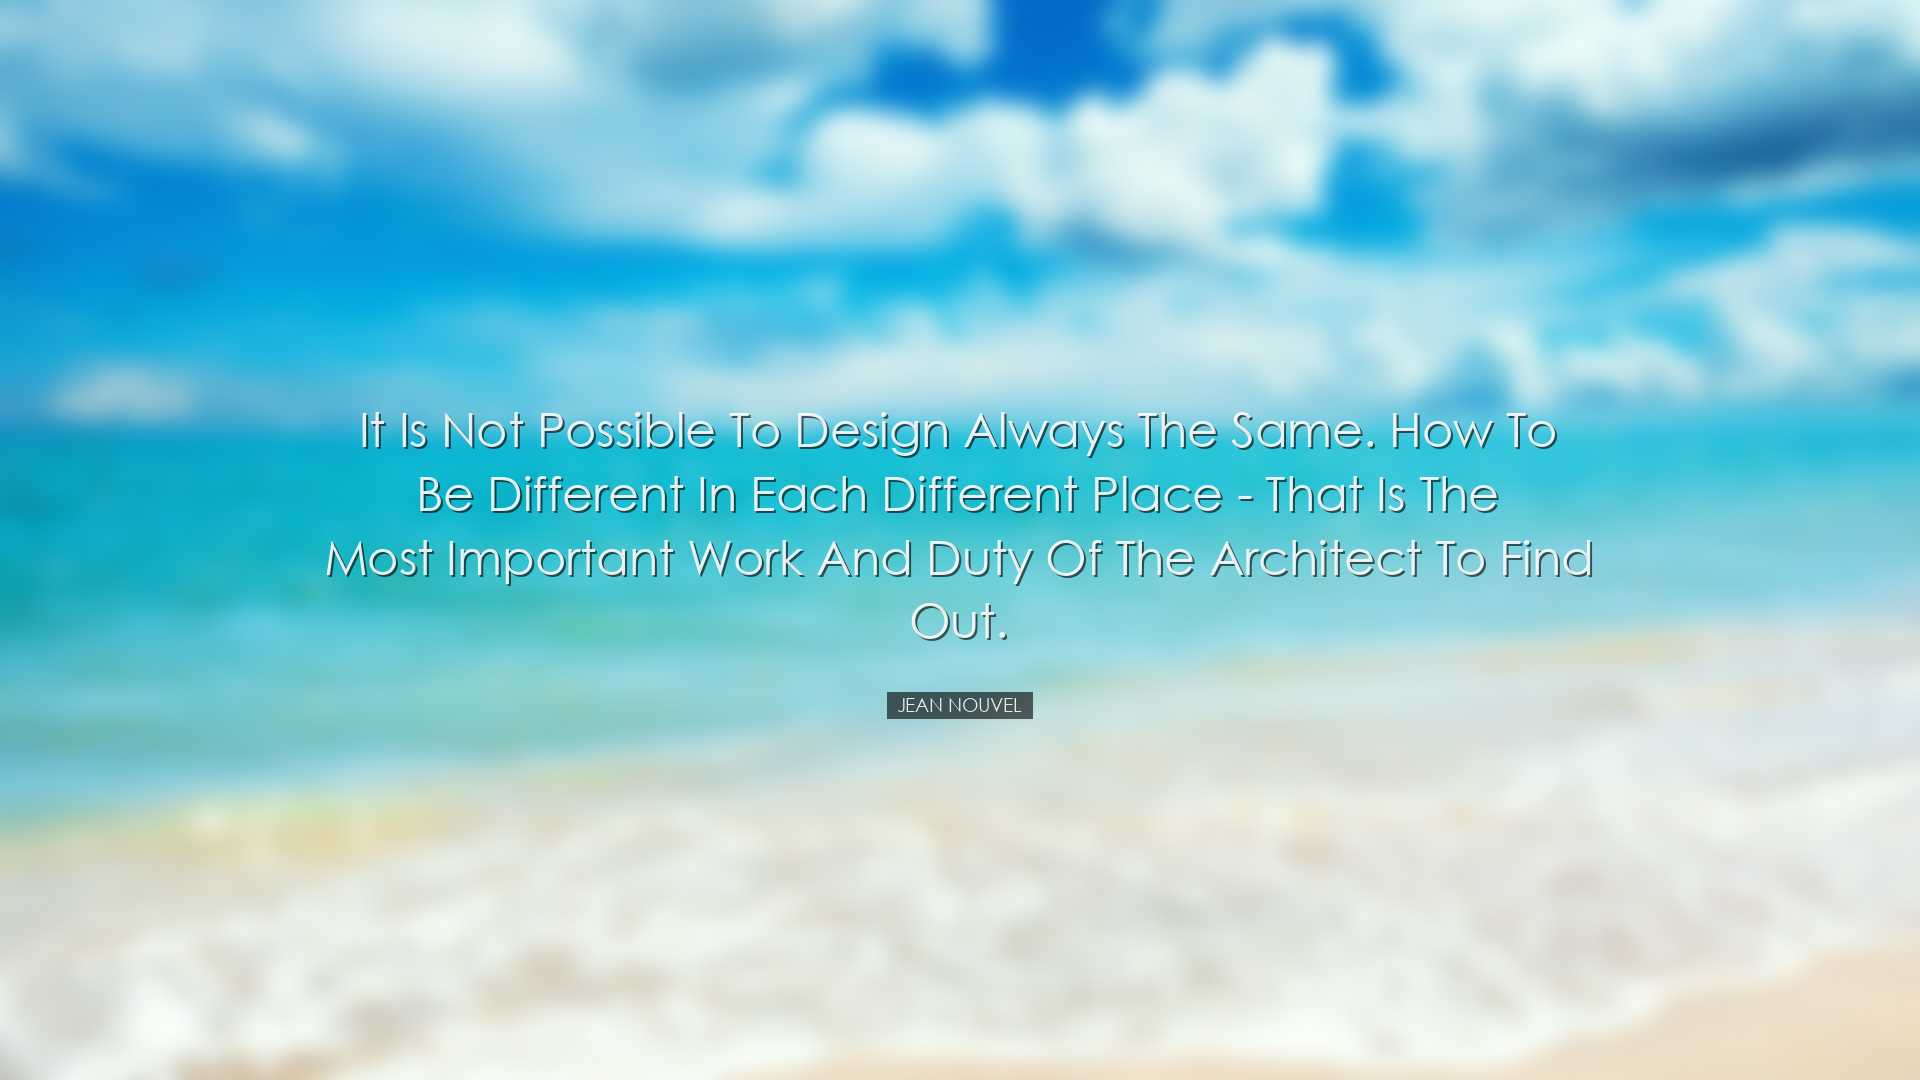 It is not possible to design always the same. How to be different